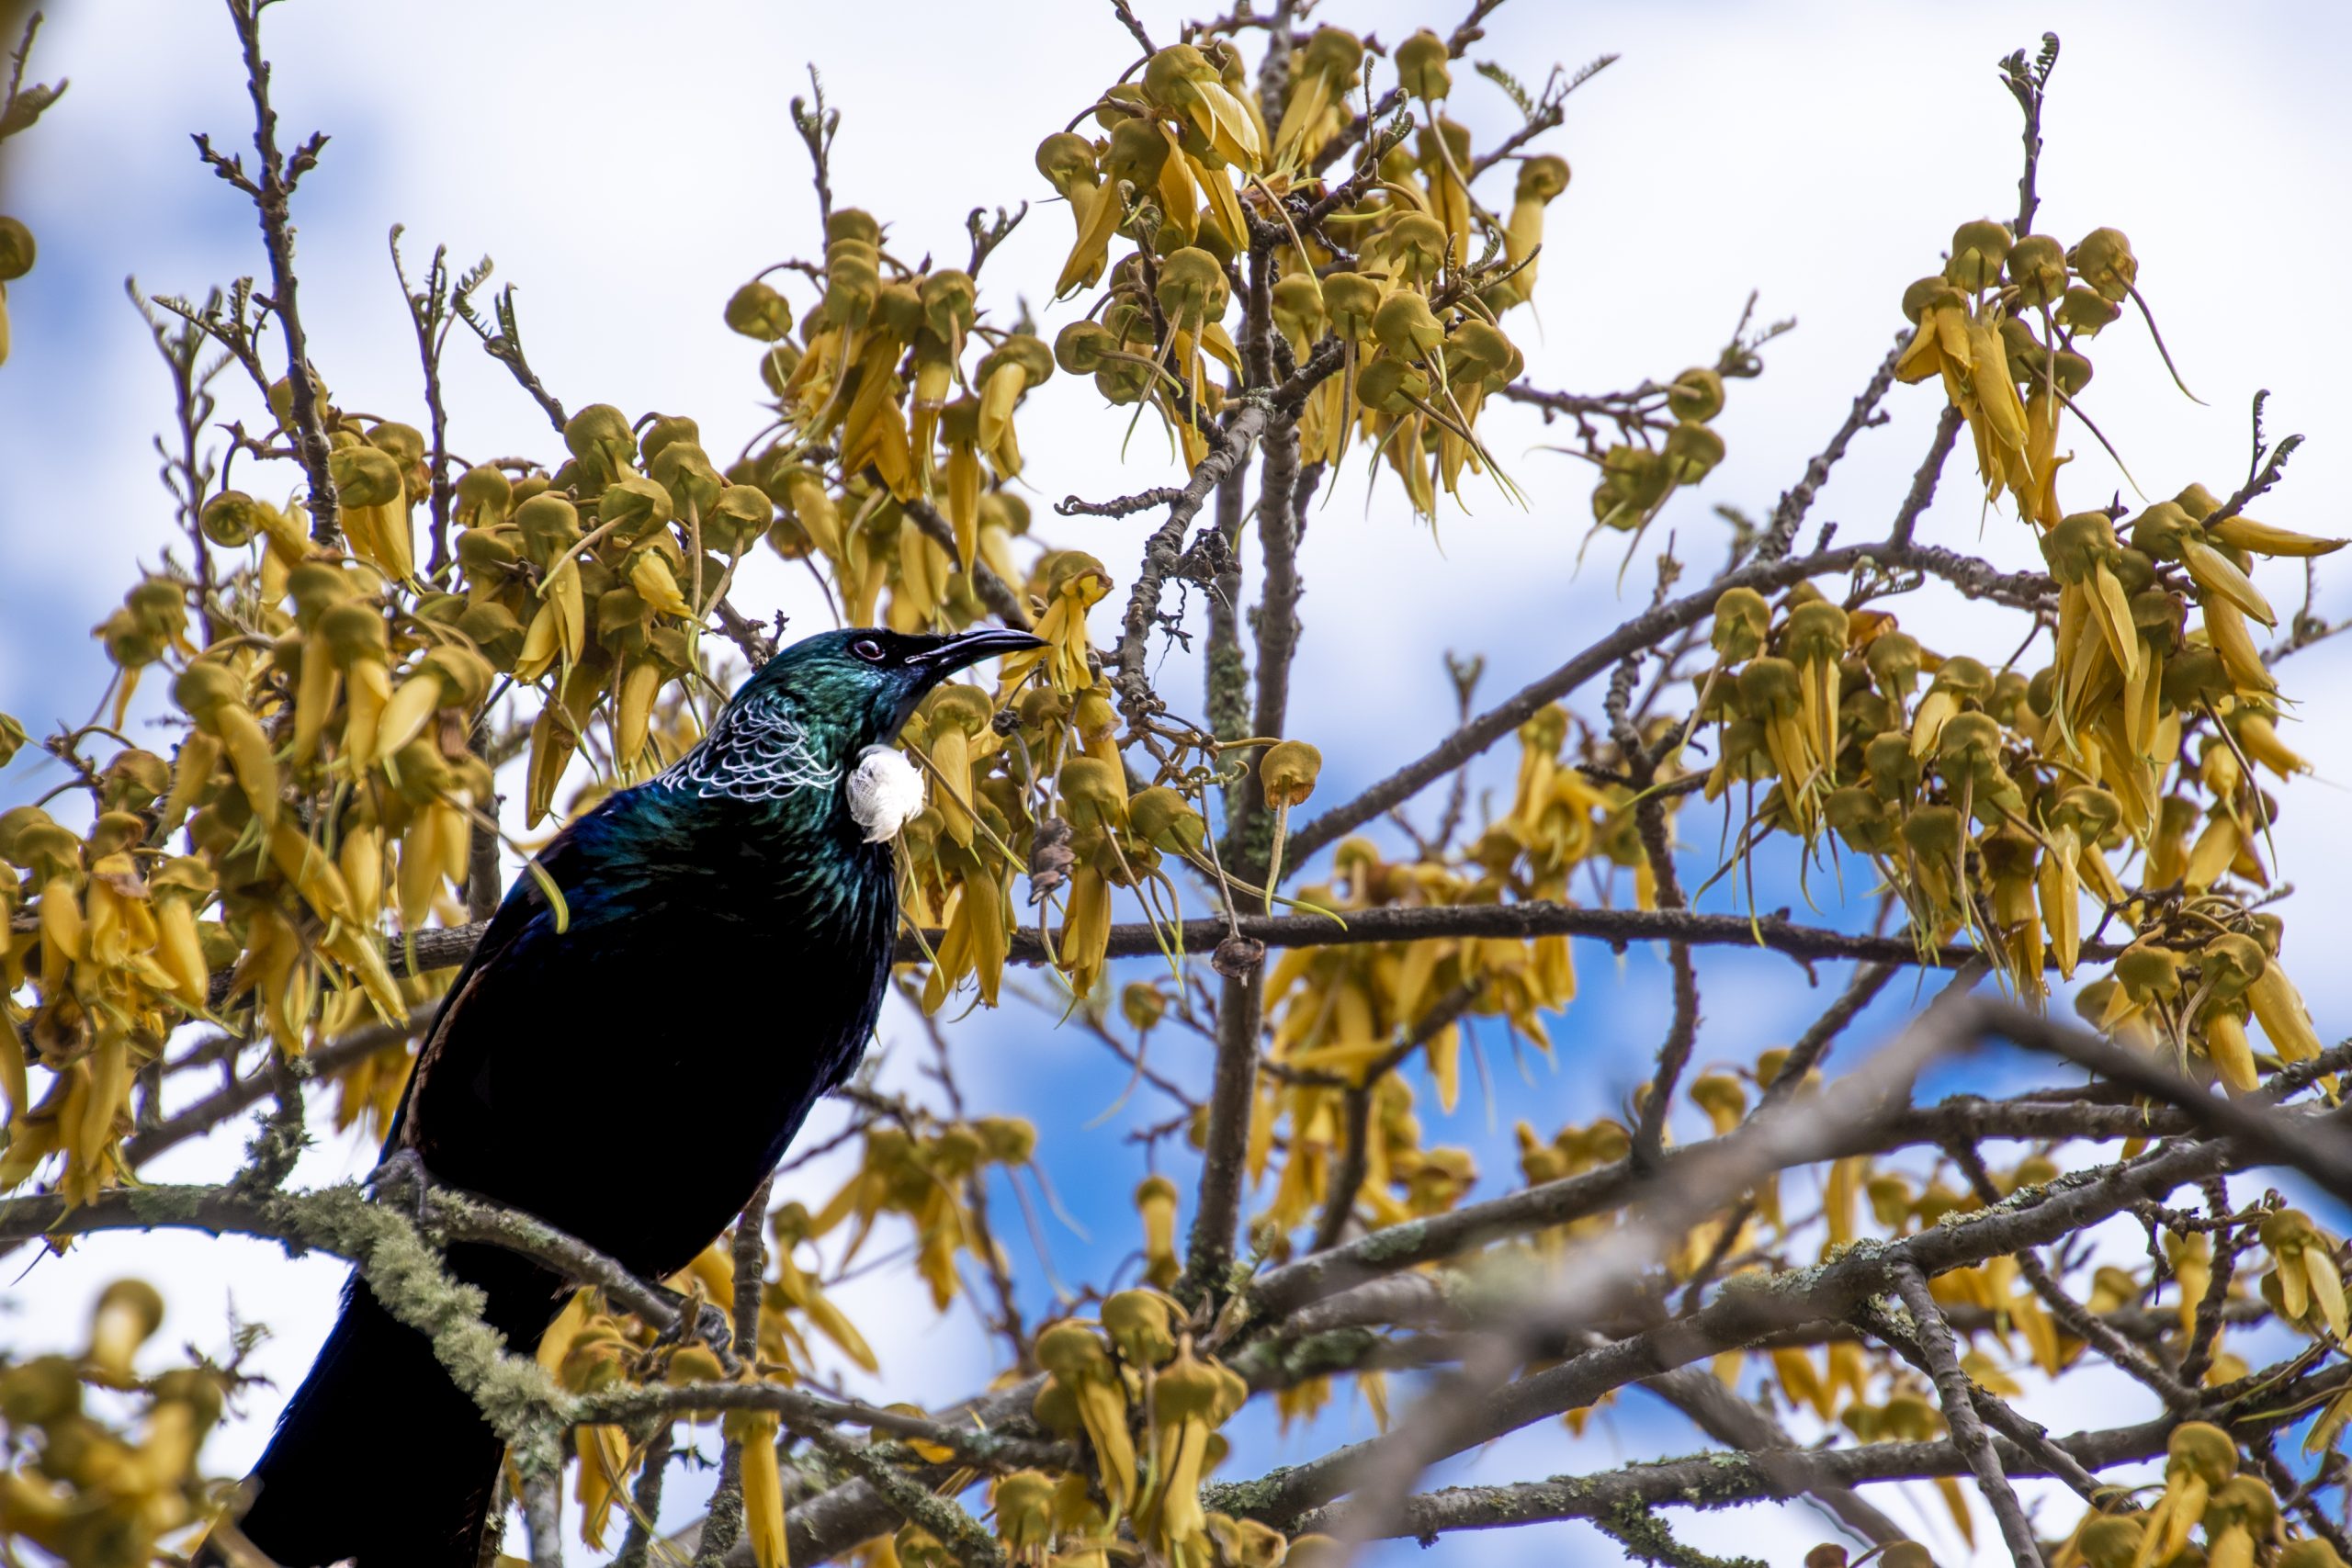 Tui bird in tree with yellow flowers